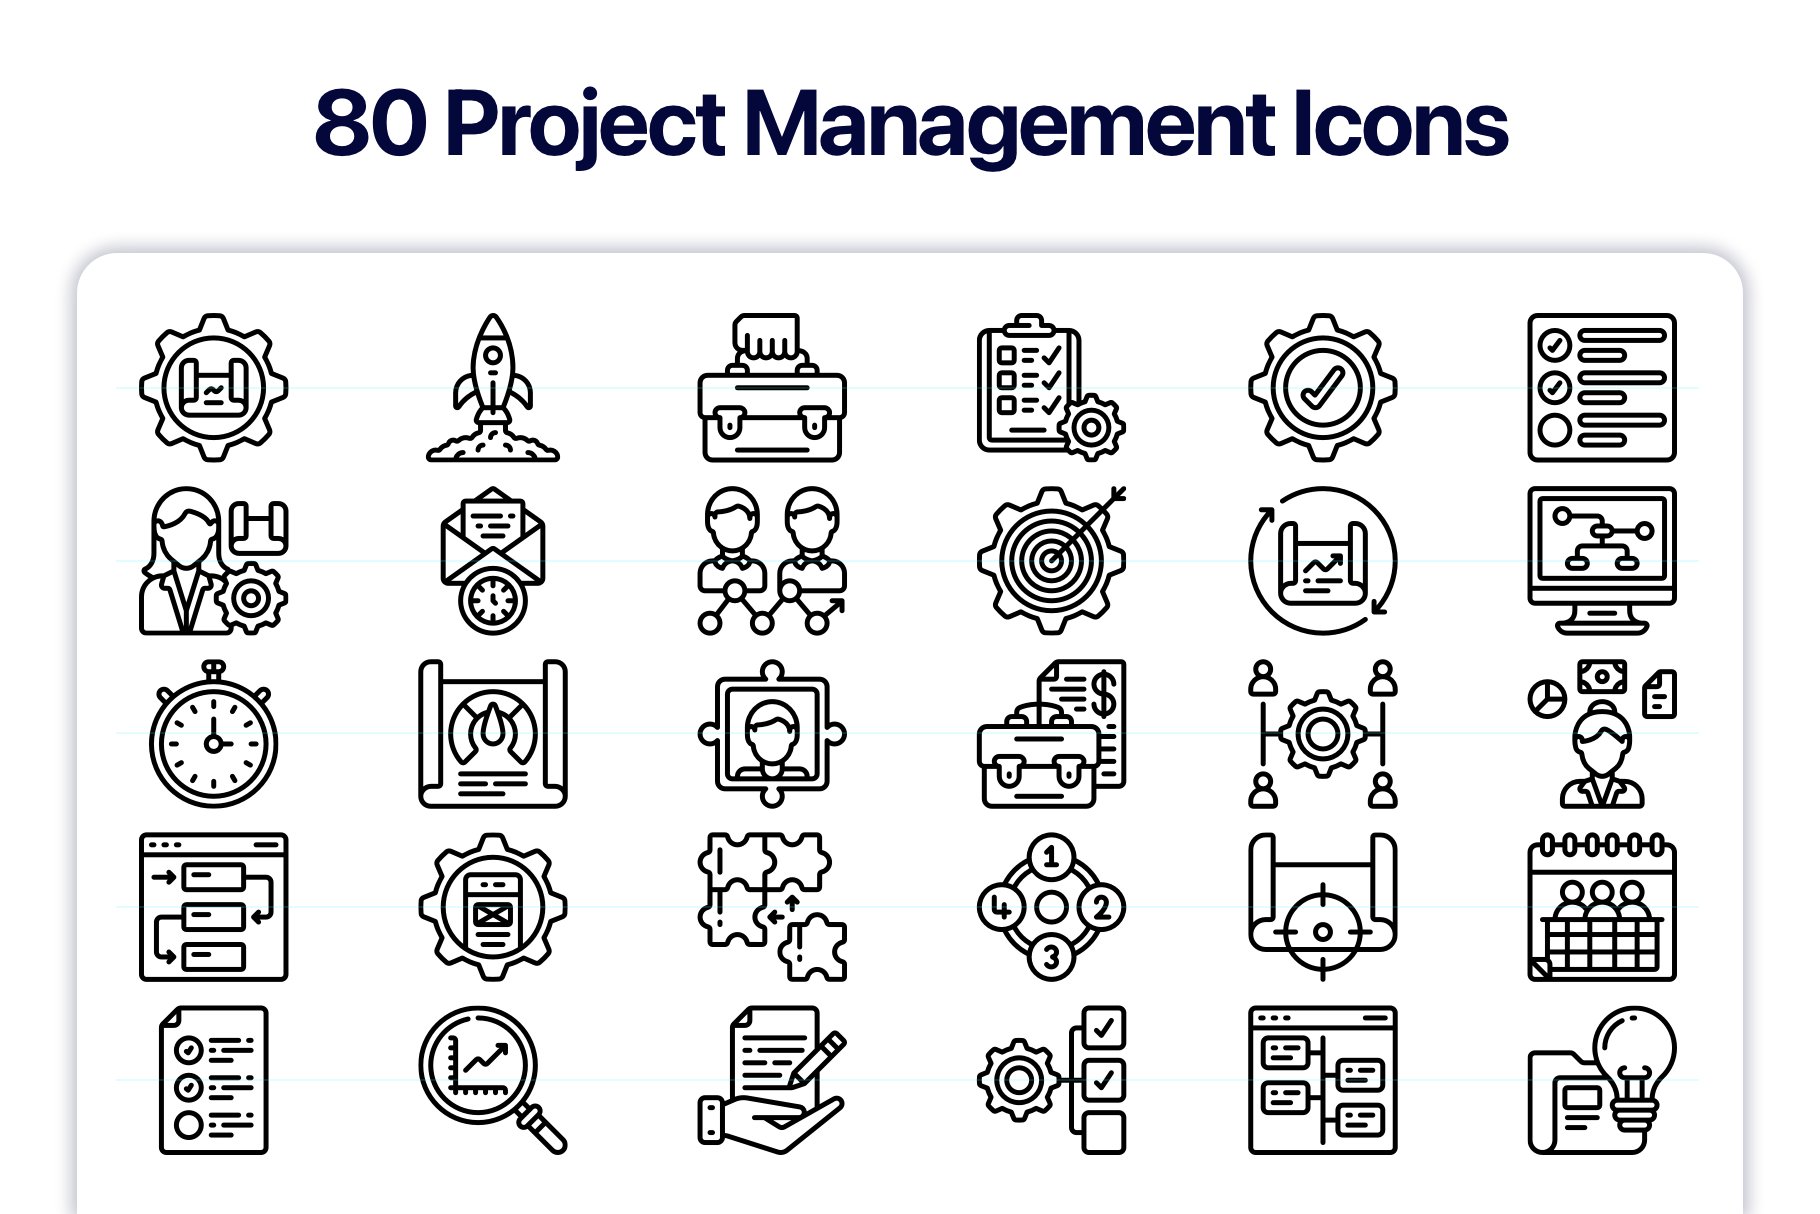 80 project management icons.